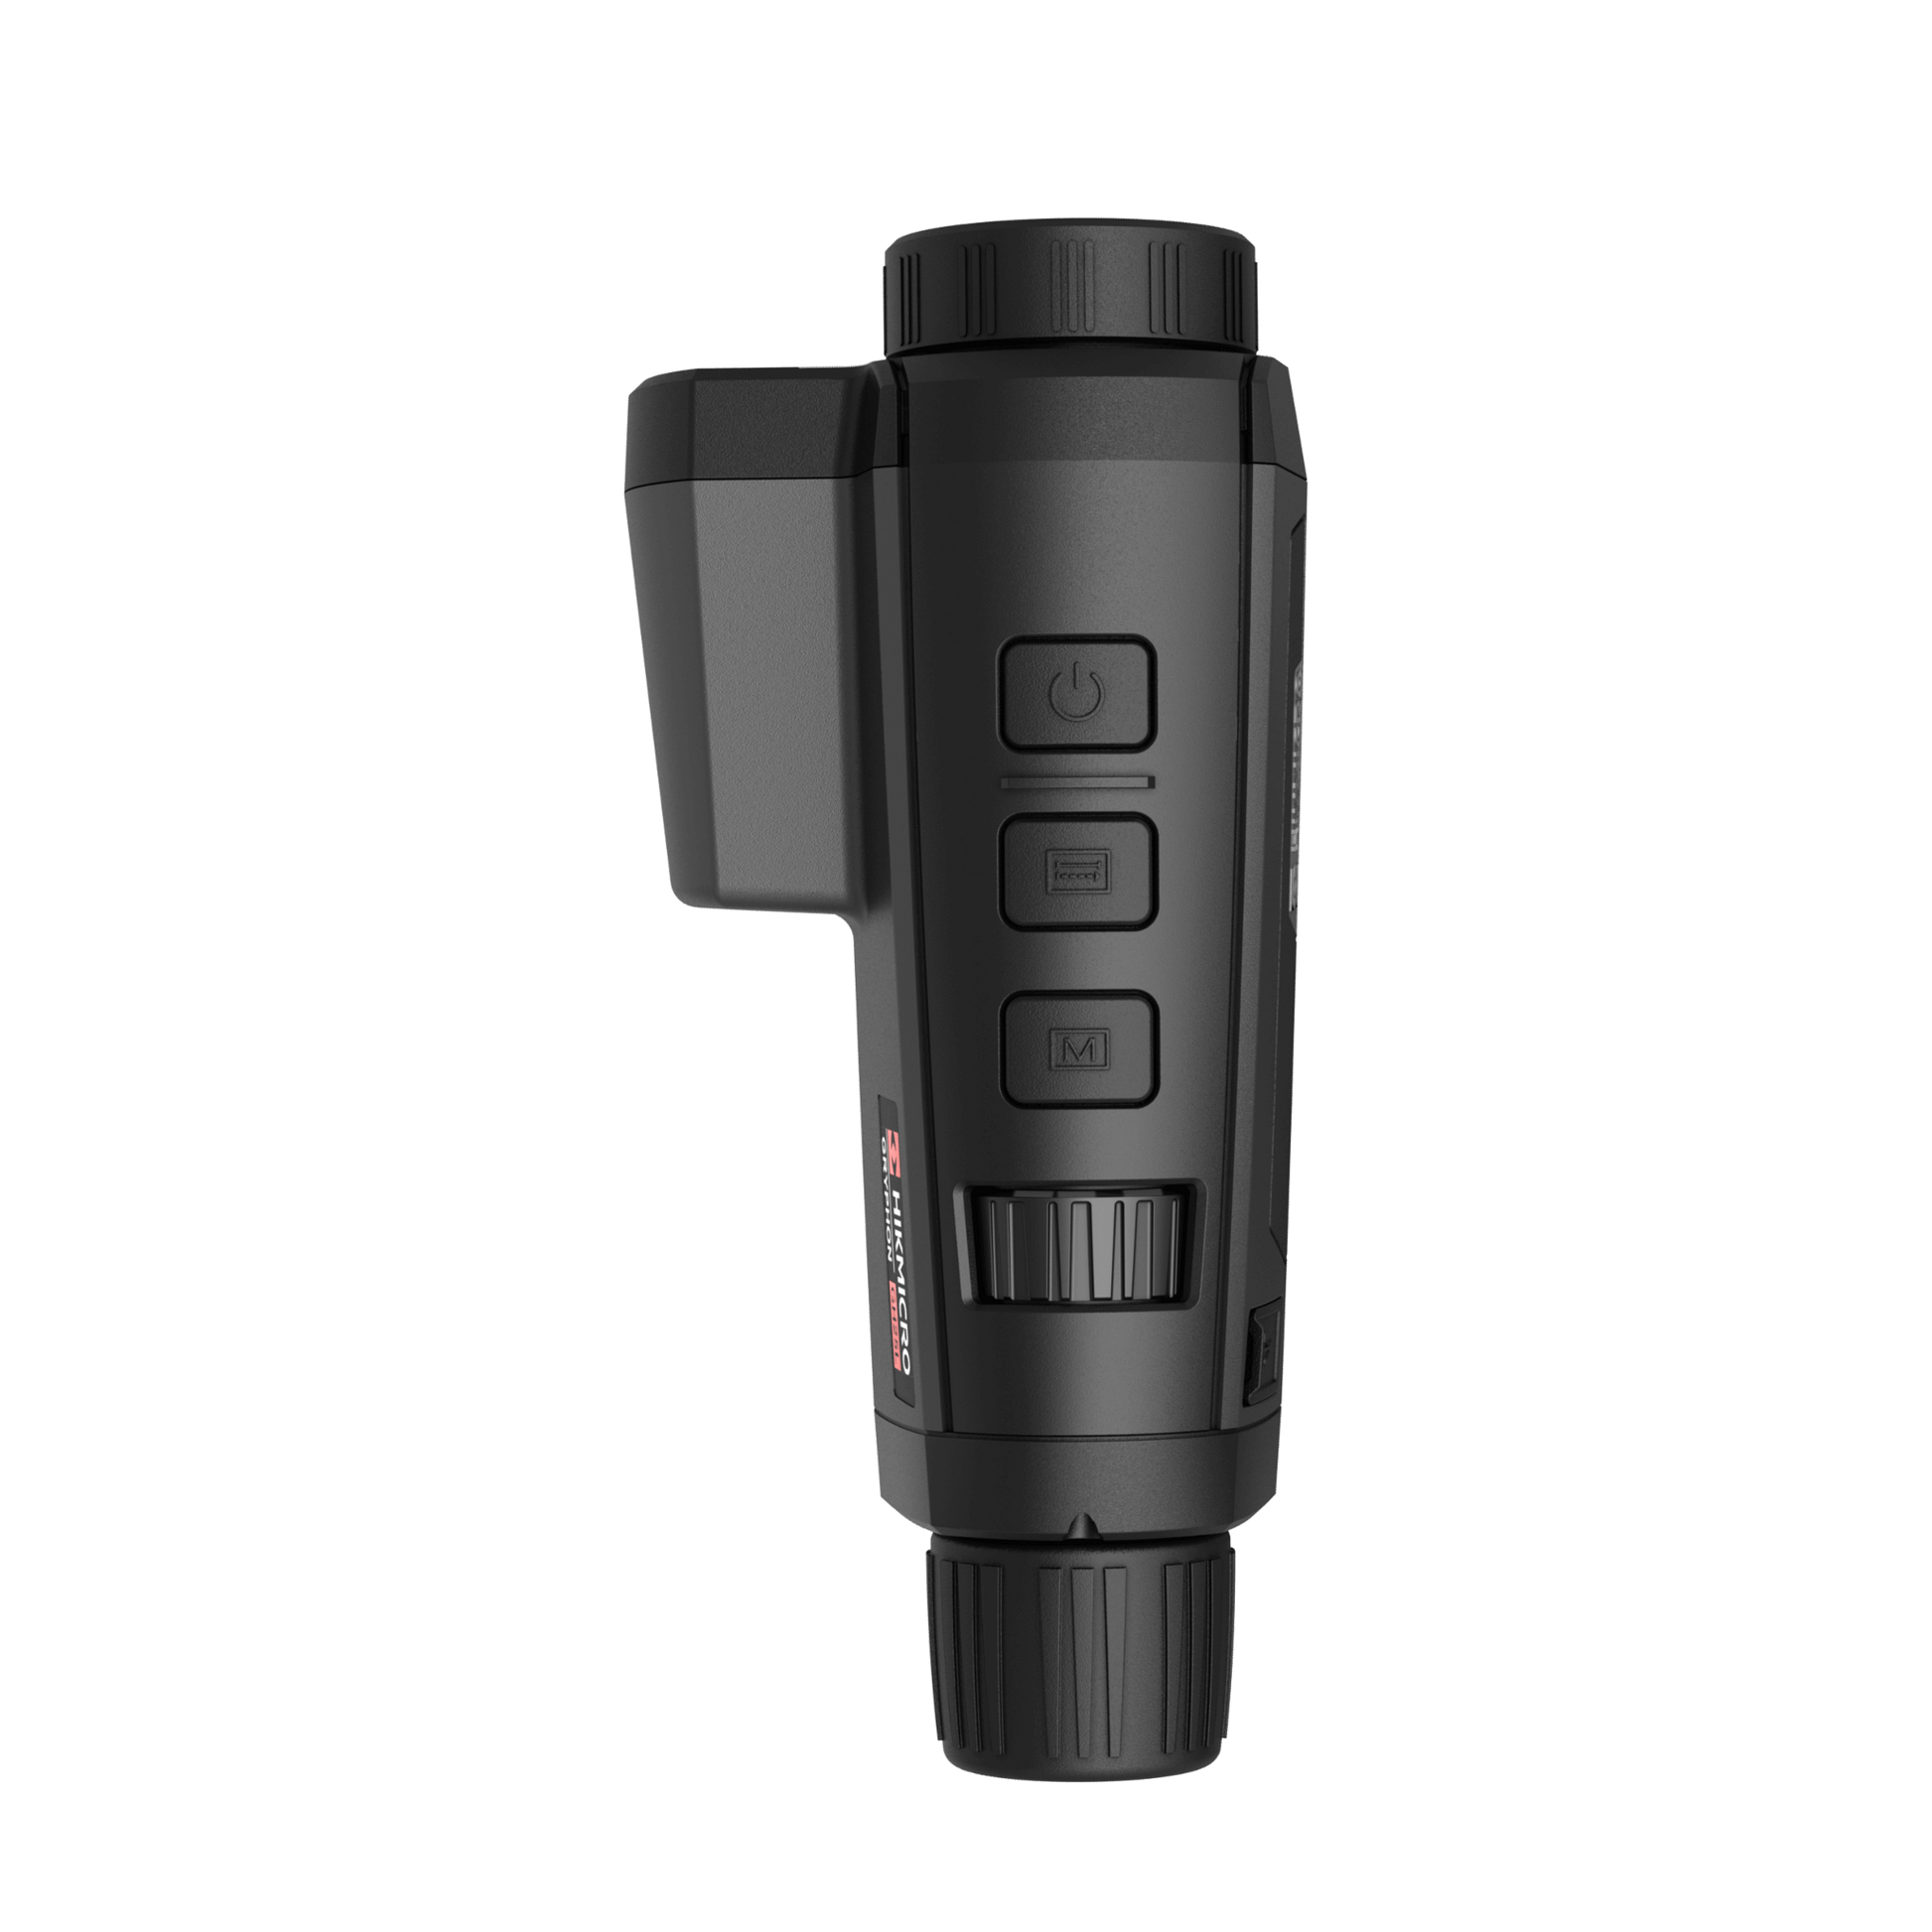 Cape Thermal imaging monocular for sale - HikMicro Gryphon GH25L Handheld thermal monocular top view